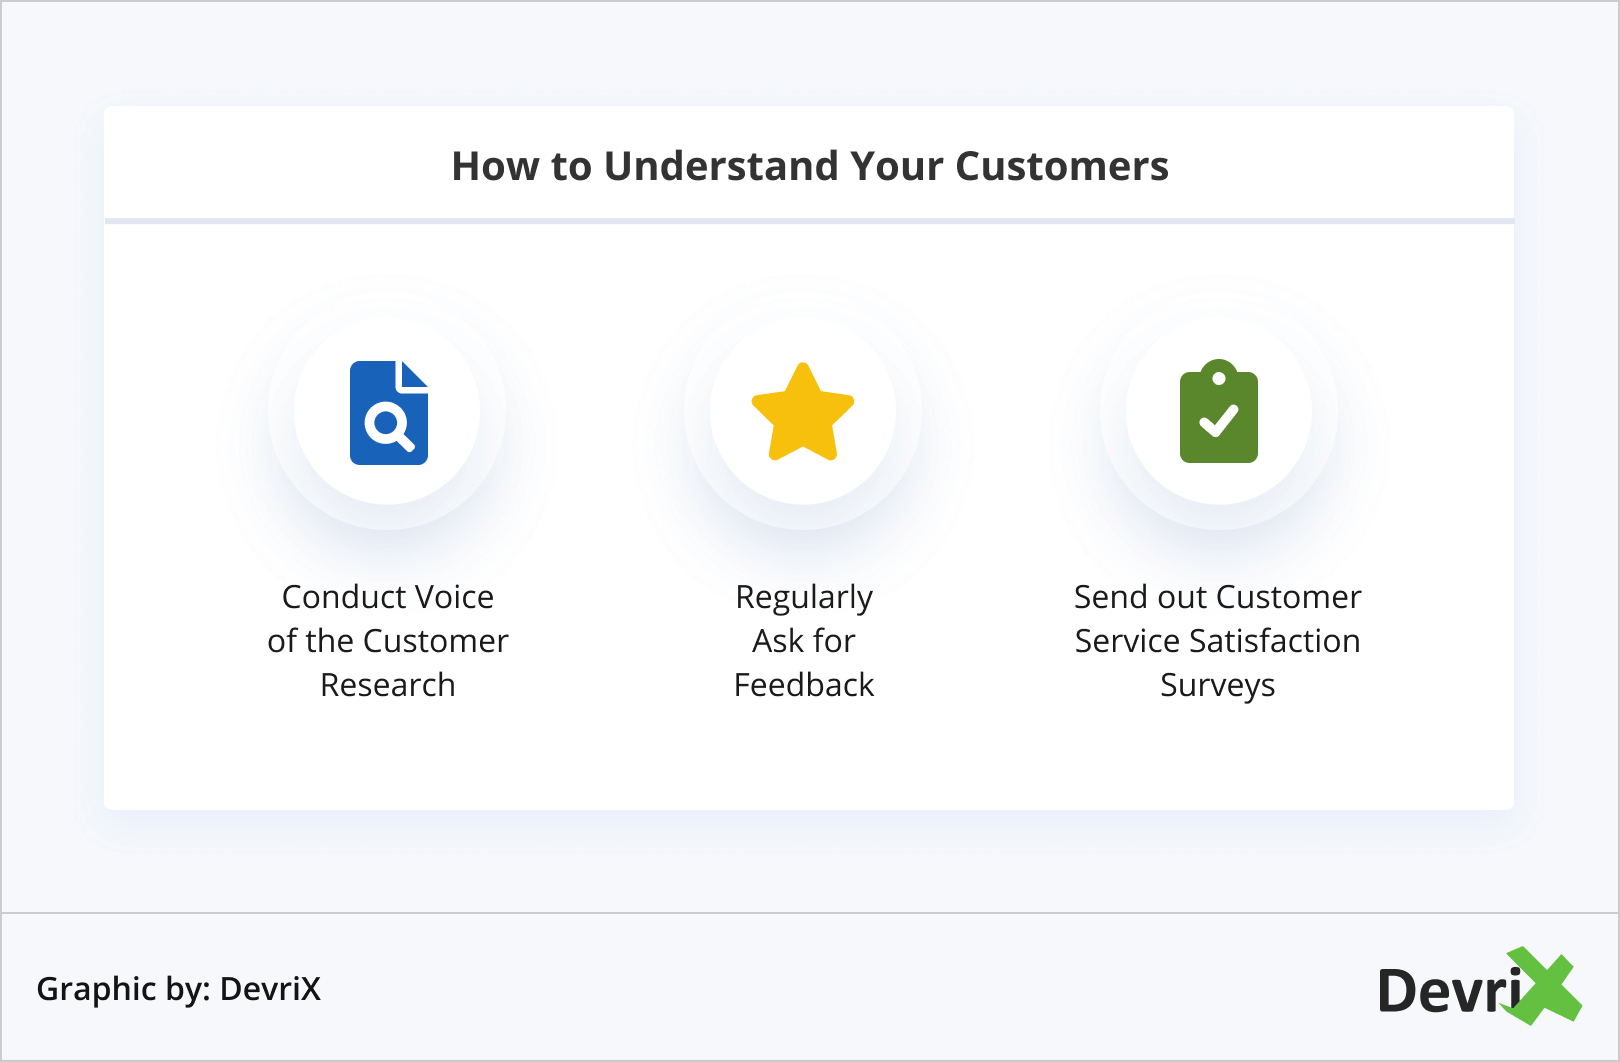 How to Understand Your Customers